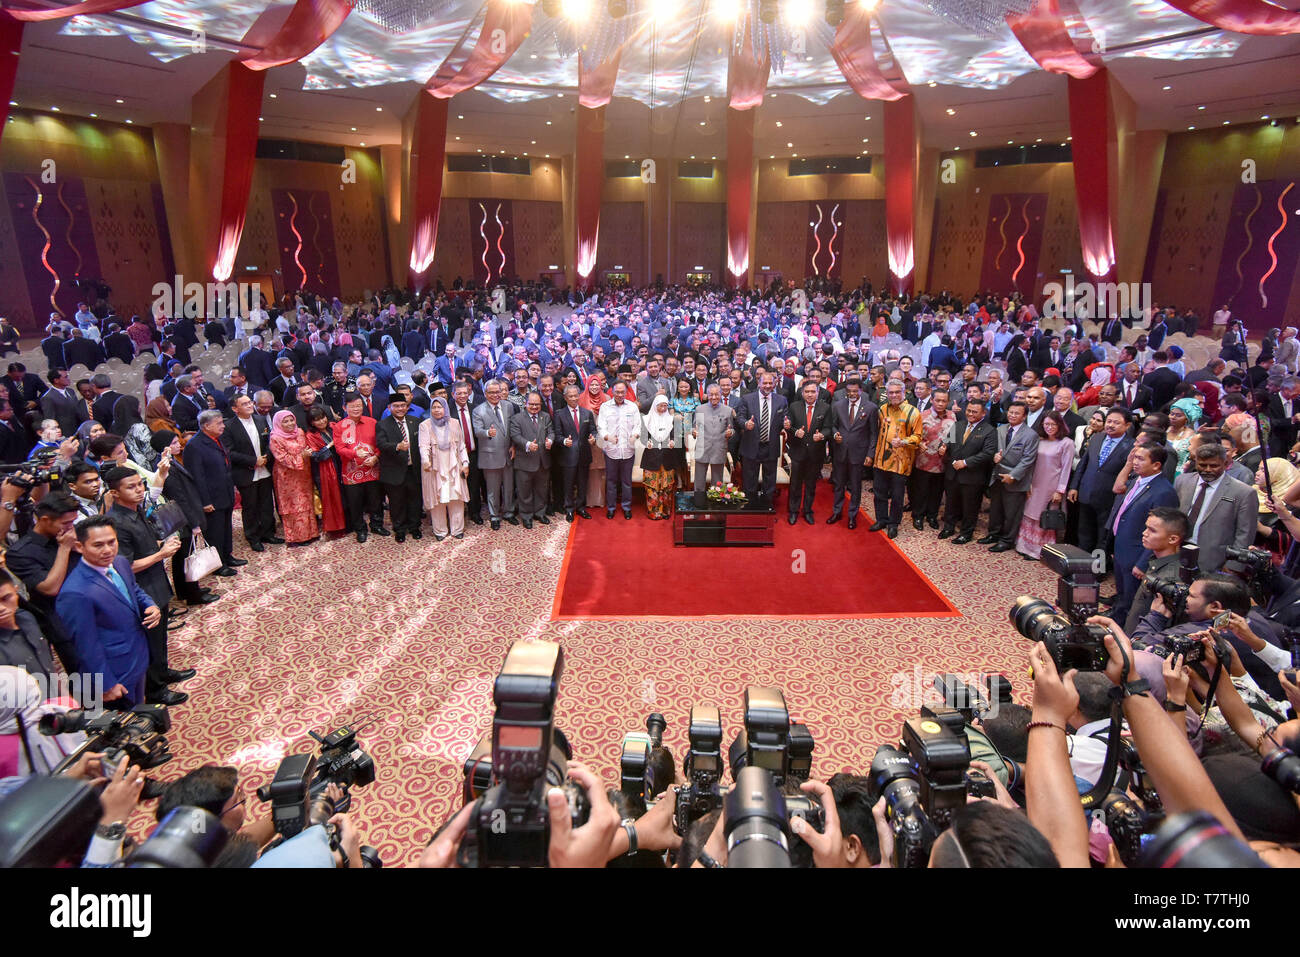 (190509) -- PUTRAJAYA, May 9, 2019 (Xinhua) -- Malaysian Prime Minister Mahathir Mohamad poses with his government ministers for photos at an event to mark the first year since his Pakatan Harapan (PH) coalition won power at the national polls on May 9 last year,  in Putrajaya, Malaysia, May 9, 2019. Malaysia has achieved progress in combating corruption and in restoring government institutions after taking over the government in a smooth transition but much remains to be done especially in repairing the national economy, Malaysian Prime Minister Mahathir Mohamad said on Thursday. (Xinhua/Chon Stock Photo